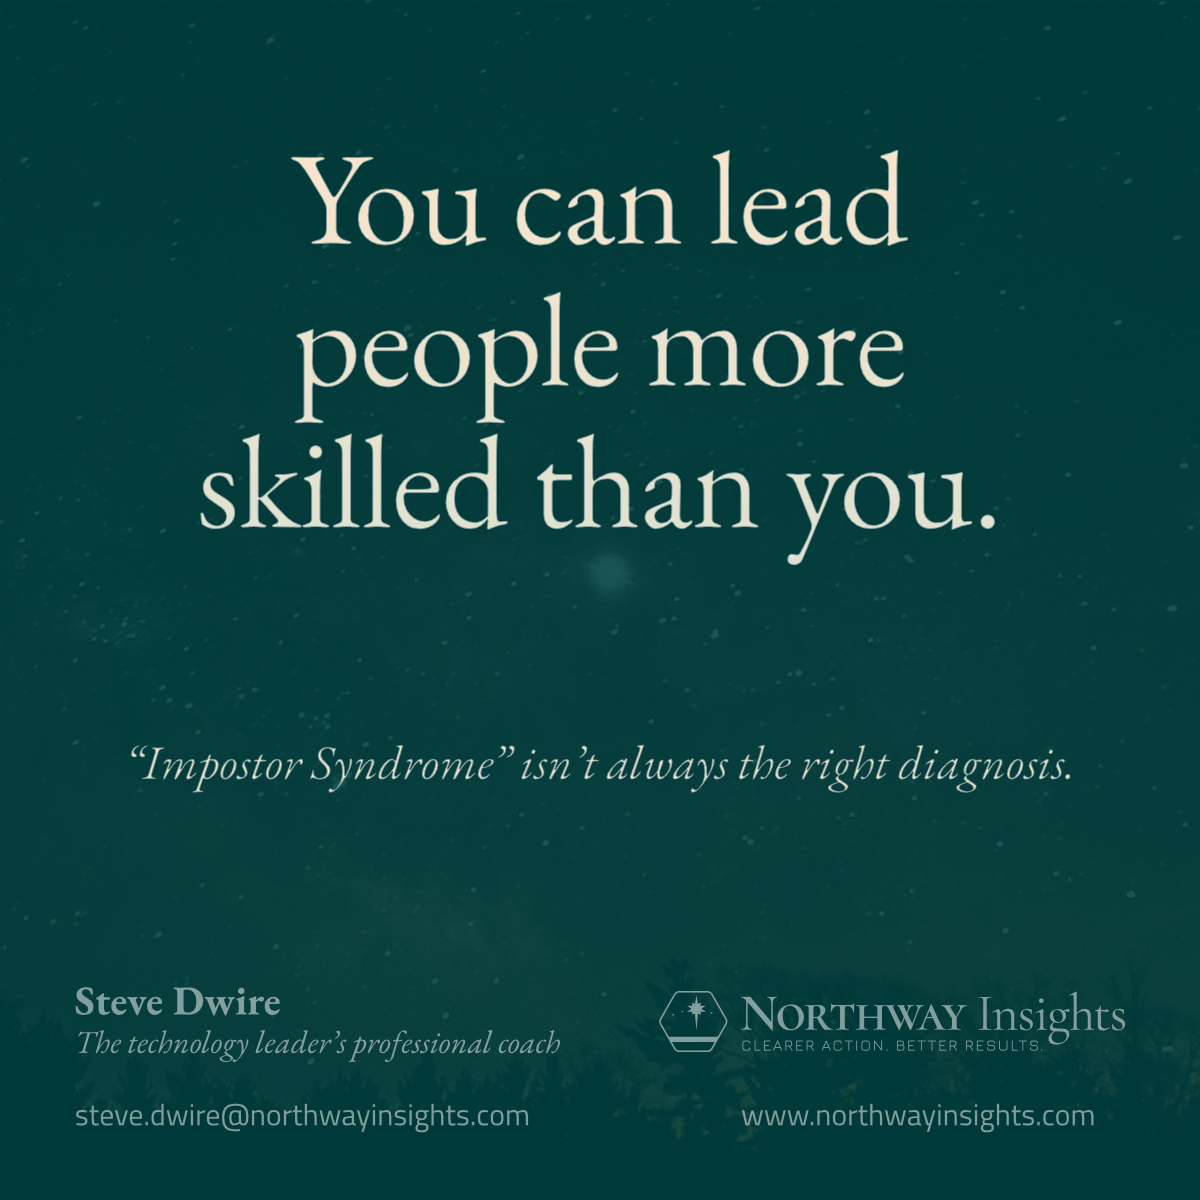 You can lead people more skilled than you.